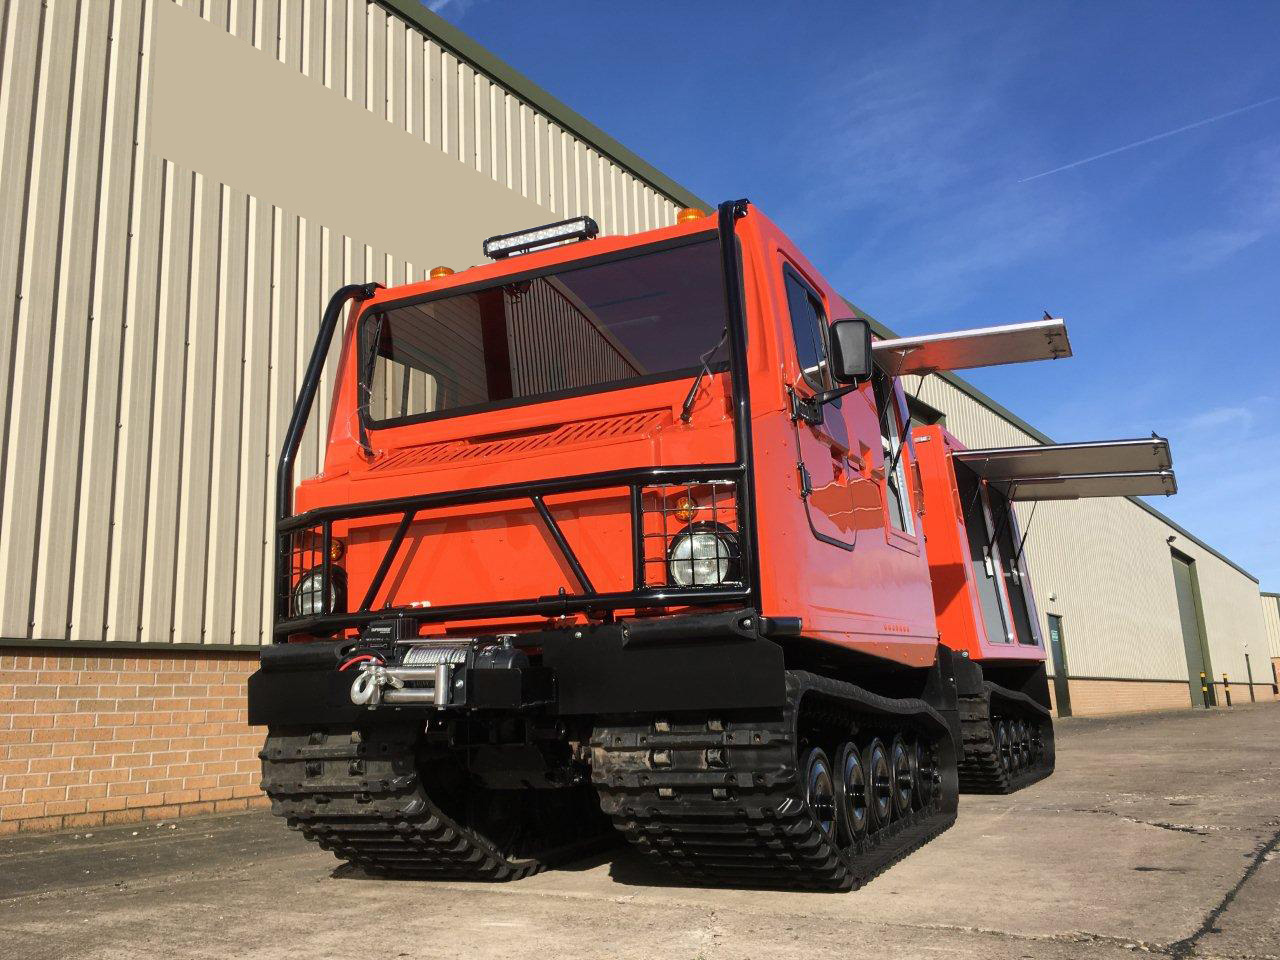 <a href='/index.php/drivetrain/tracked/50253-hagglund-bv206-multi-purpose-vehicle-50253' title='Read more...' class='joodb_titletink'>Hagglund BV206 Multi-Purpose Vehicle - 50253</a>